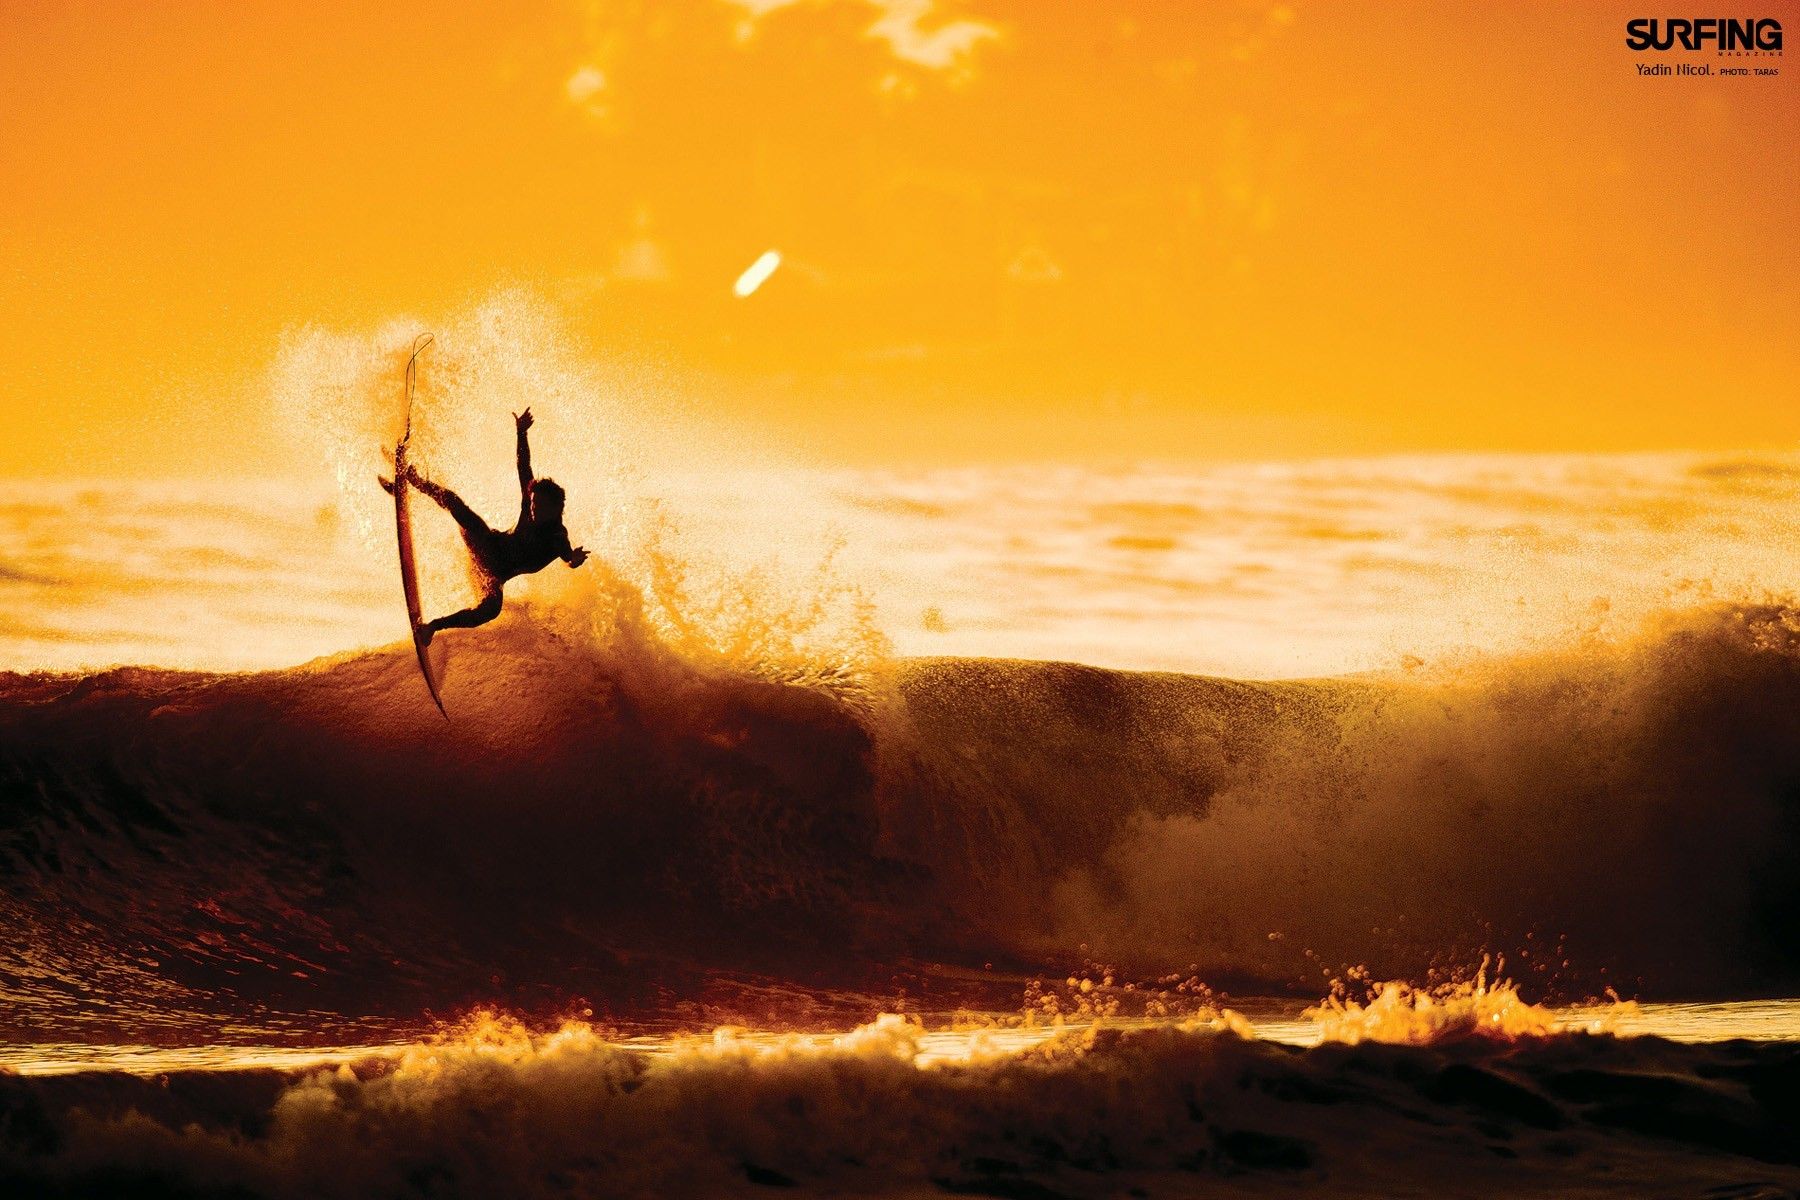 Surfing Sunrise Wallpapers 4k Hd Surfing Sunrise Backgrounds On